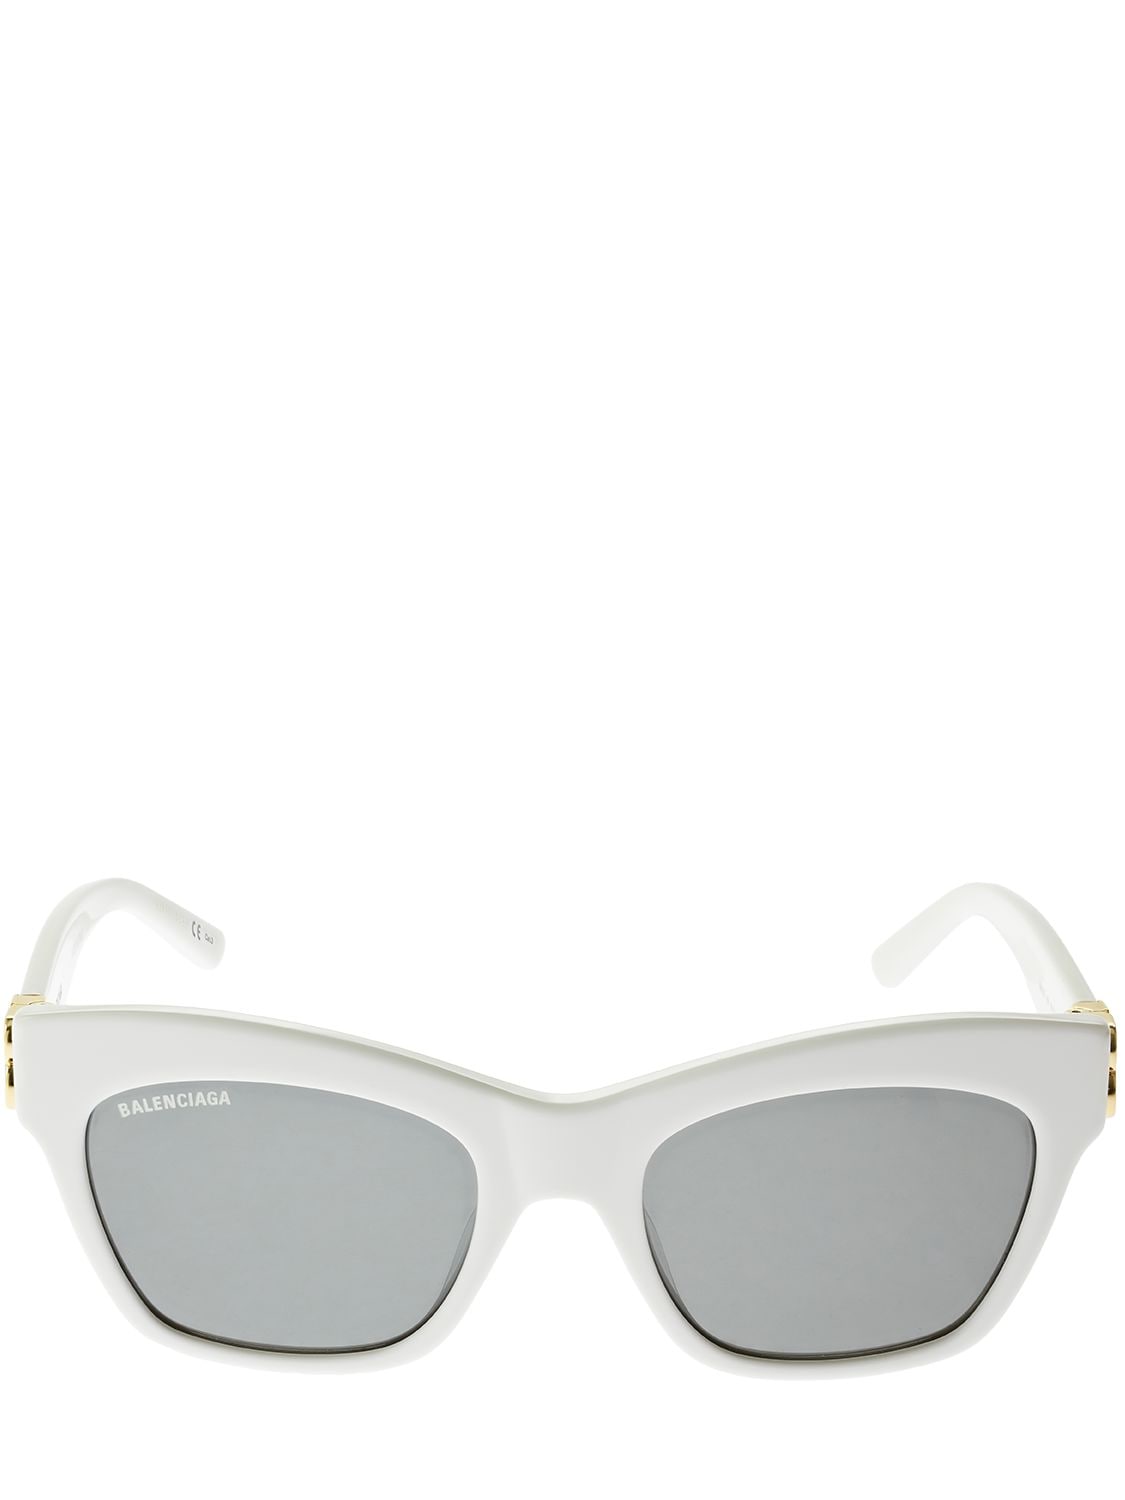 Dynasty Butterfly Acetate Sunglasses